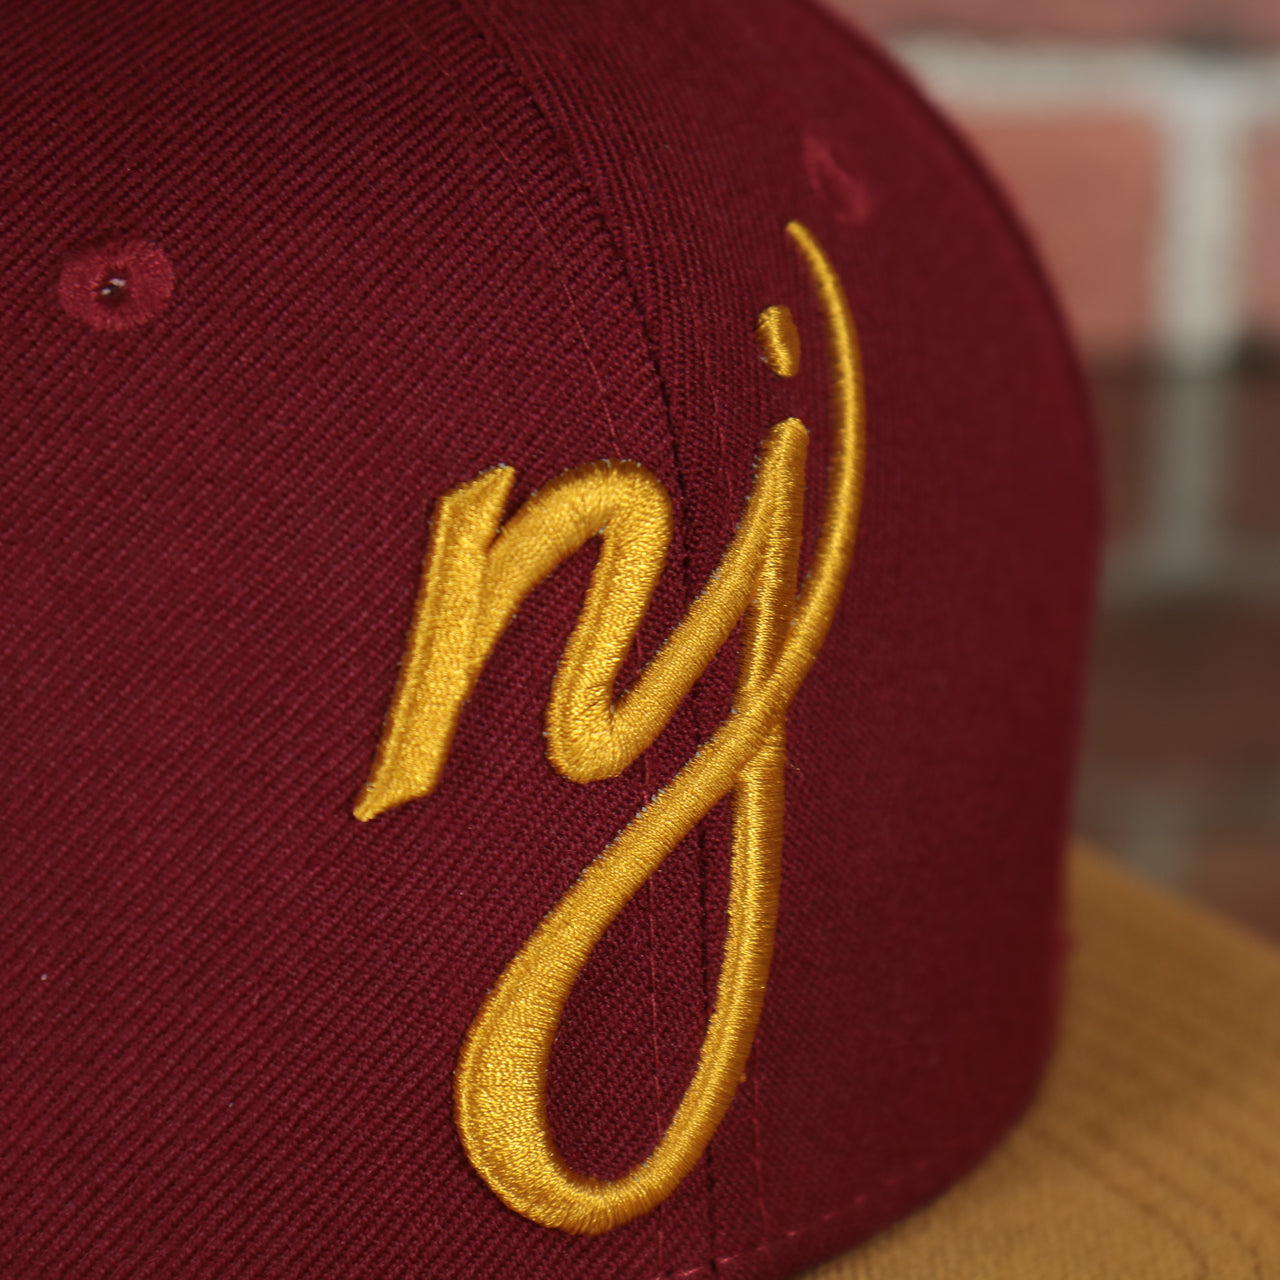 nj logo on the front of the New Jersey "NJ" Hat | New Jersey Garden State 9Fifty Gray Bottom Snapback Hat | Maroon / Gold *DISCOLORED